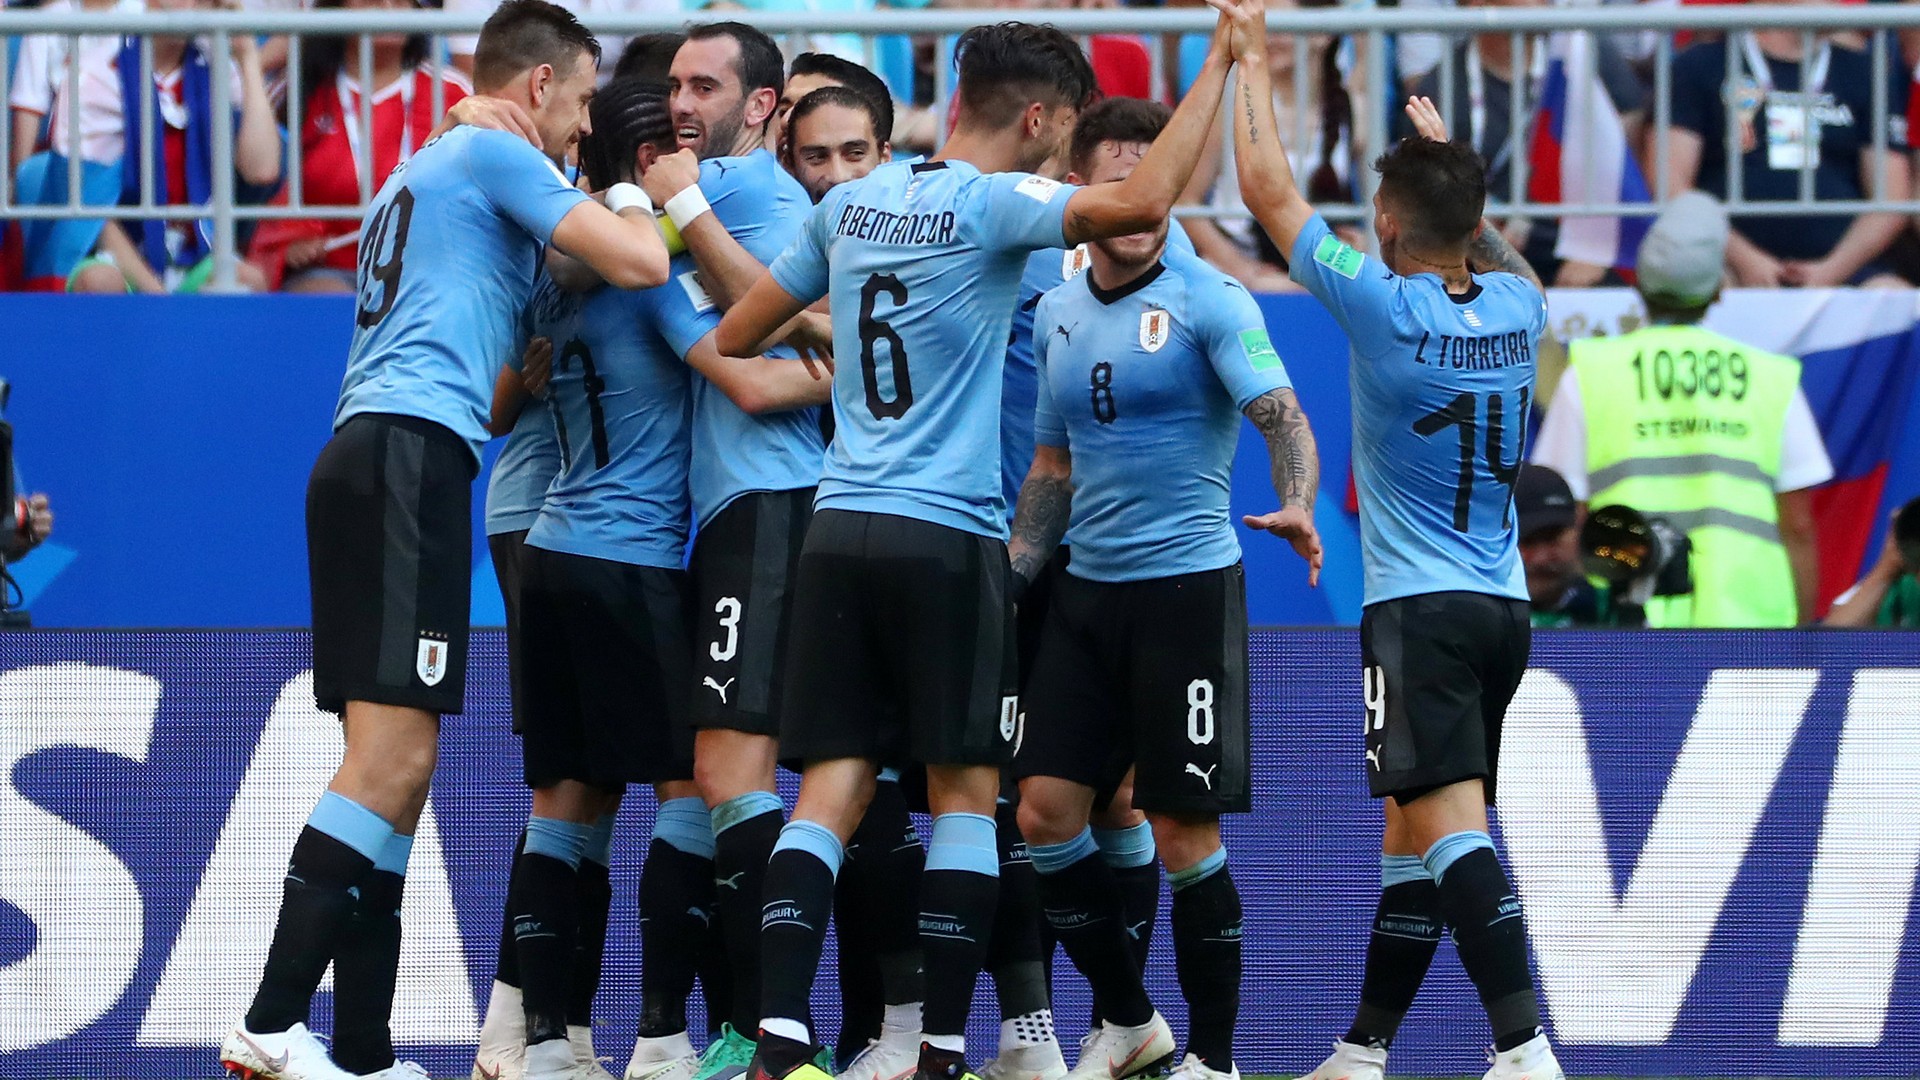 Wallpaper Uruguay National Team with image resolution 1920x1080 pixel. You can use this wallpaper as background for your desktop Computer Screensavers, Android or iPhone smartphones